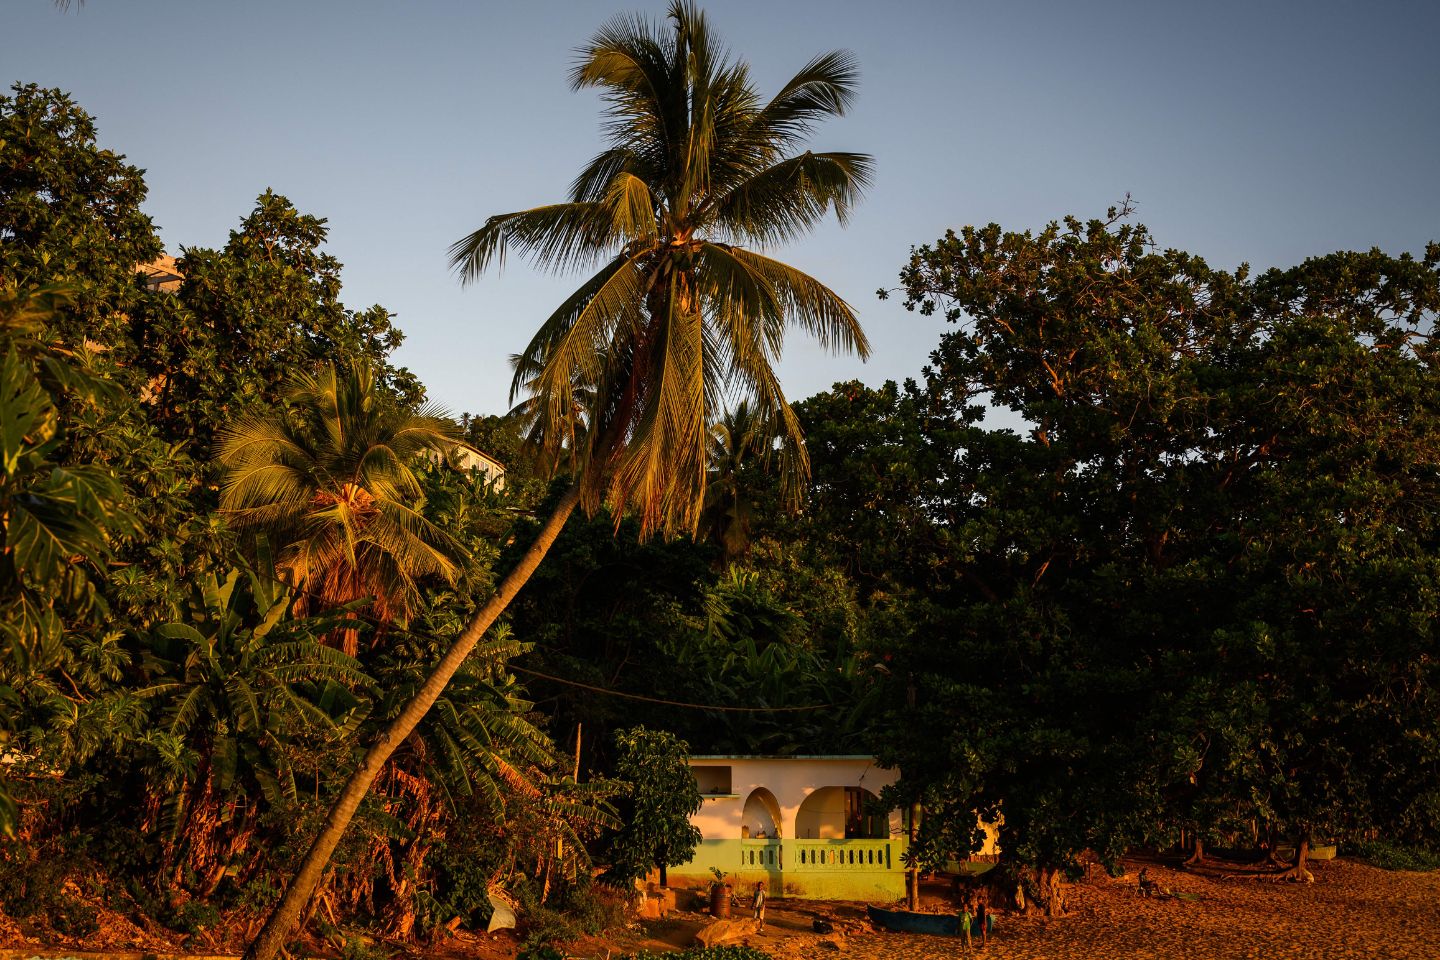 Discover The Comoros Islands of East Africa